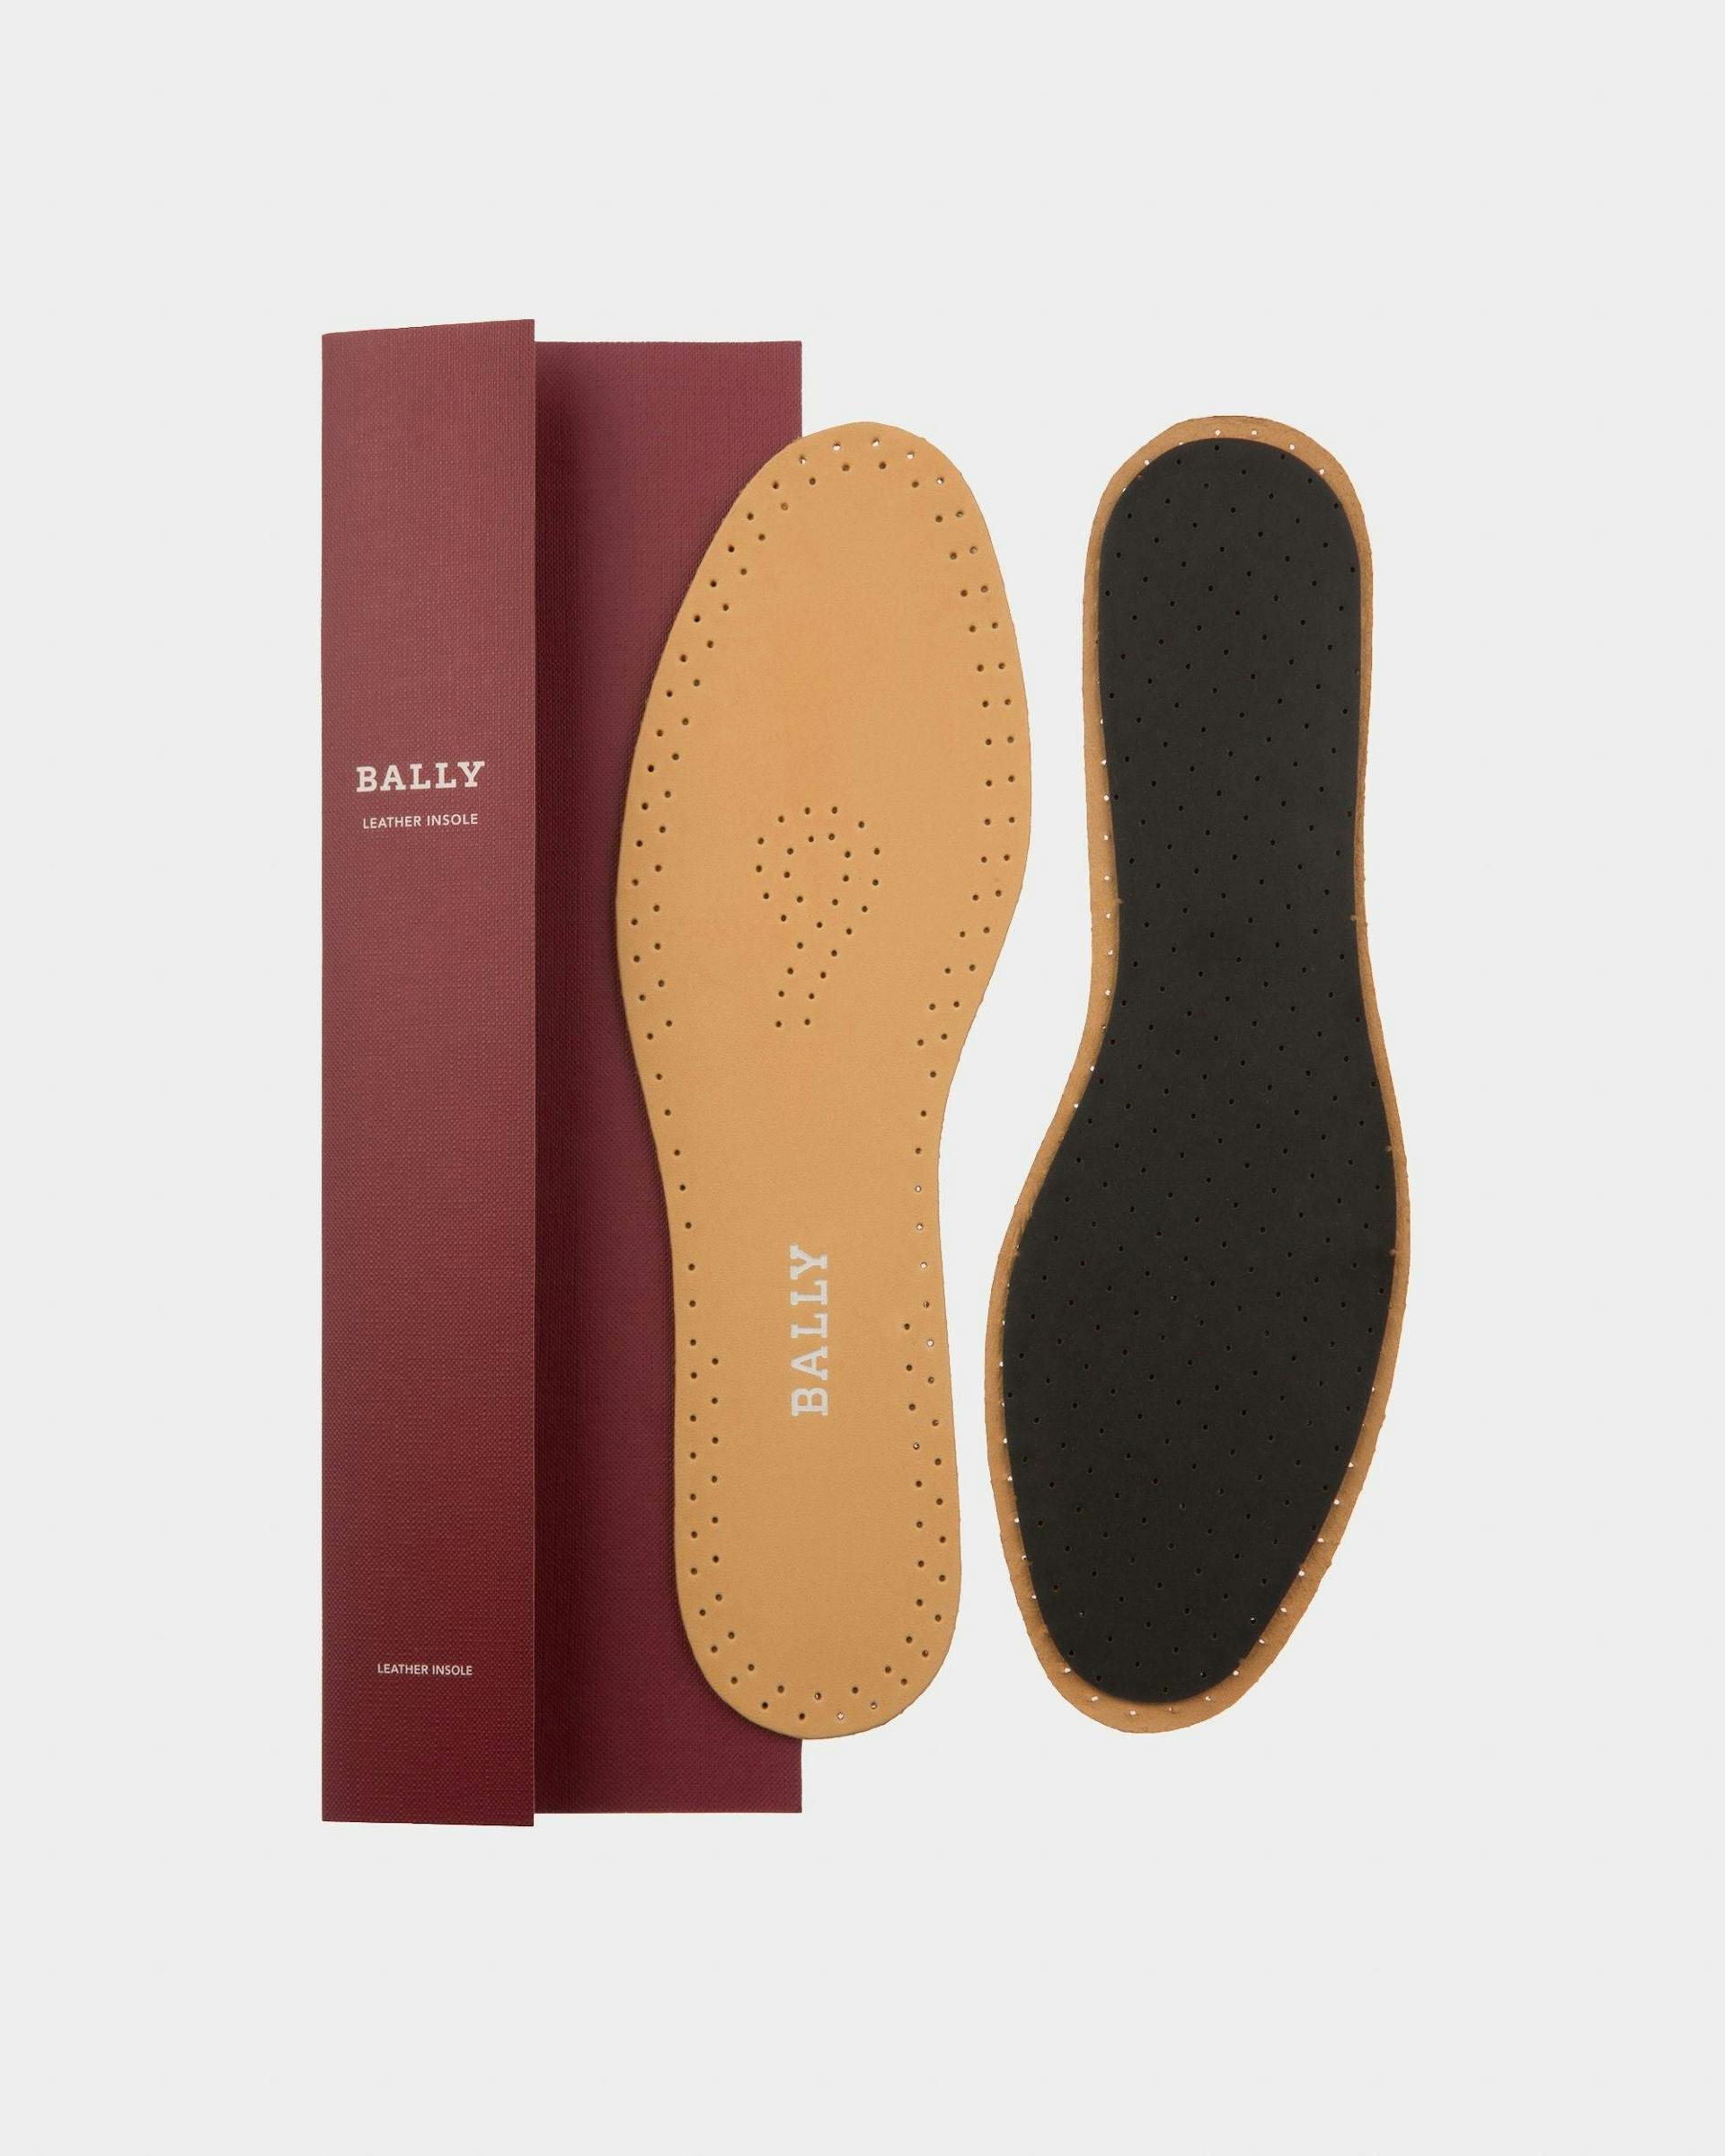 Leather Insole Shoe Care Accessory For All Shoes - Men's - Bally - 01